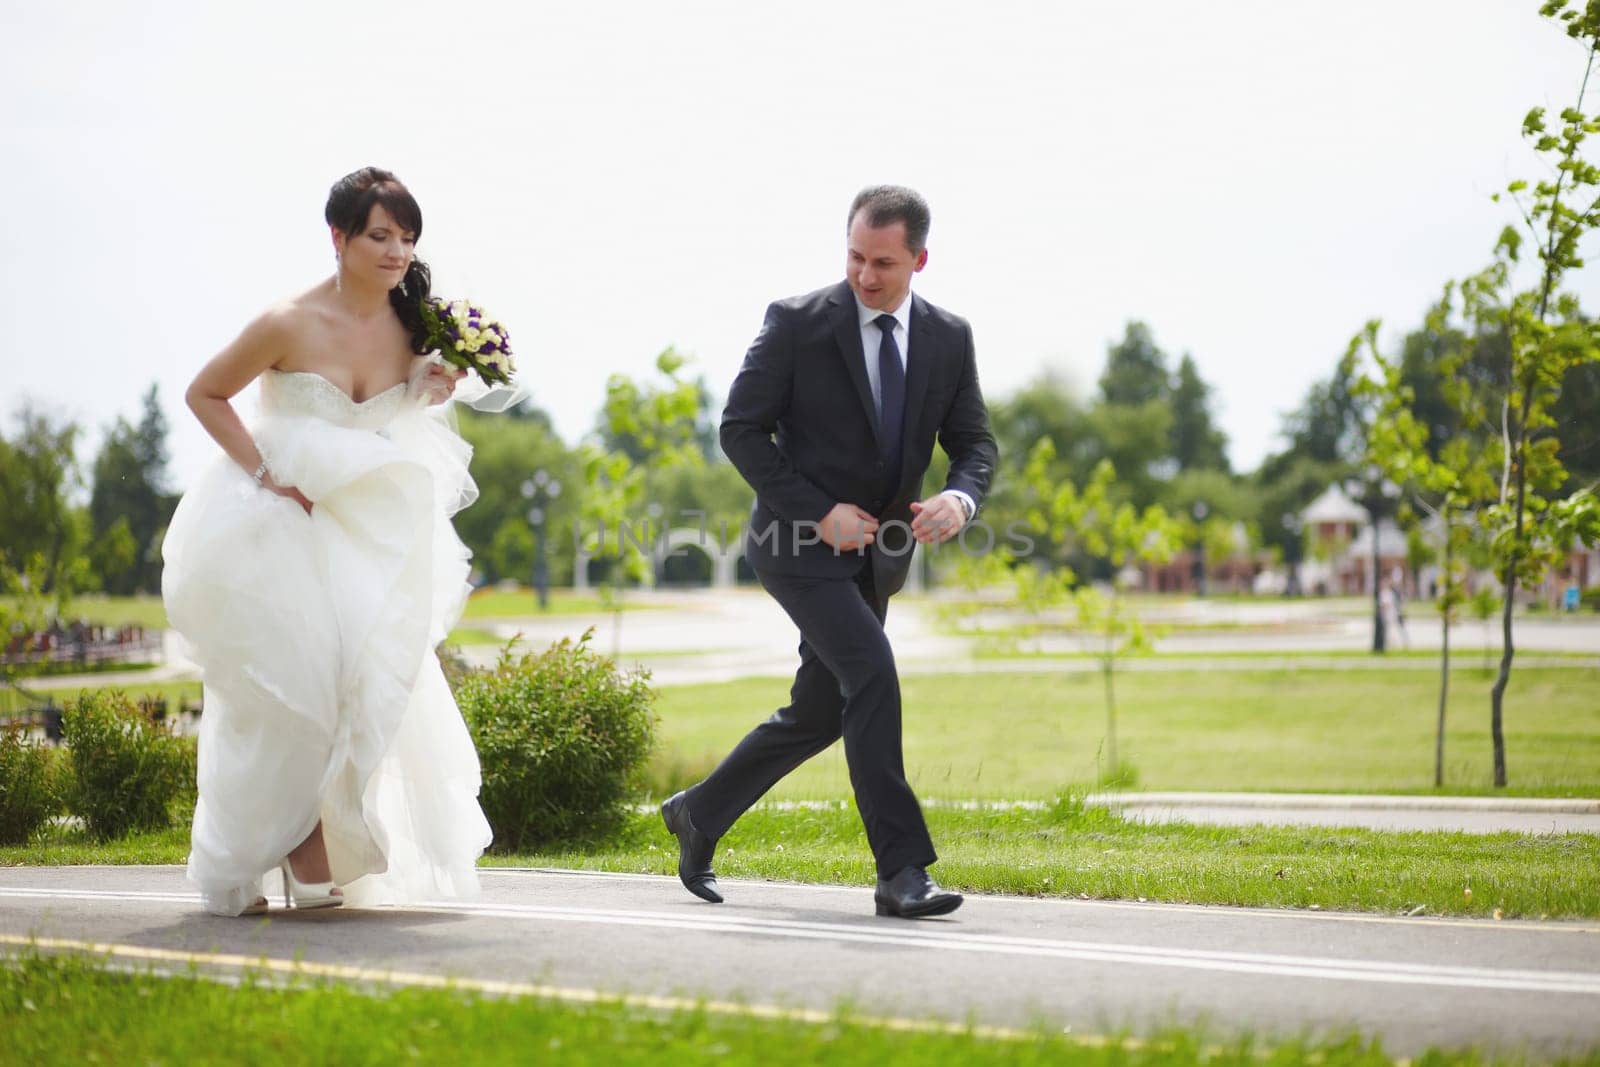 The bride and groom run together along an asphalt road in a park on a summer day